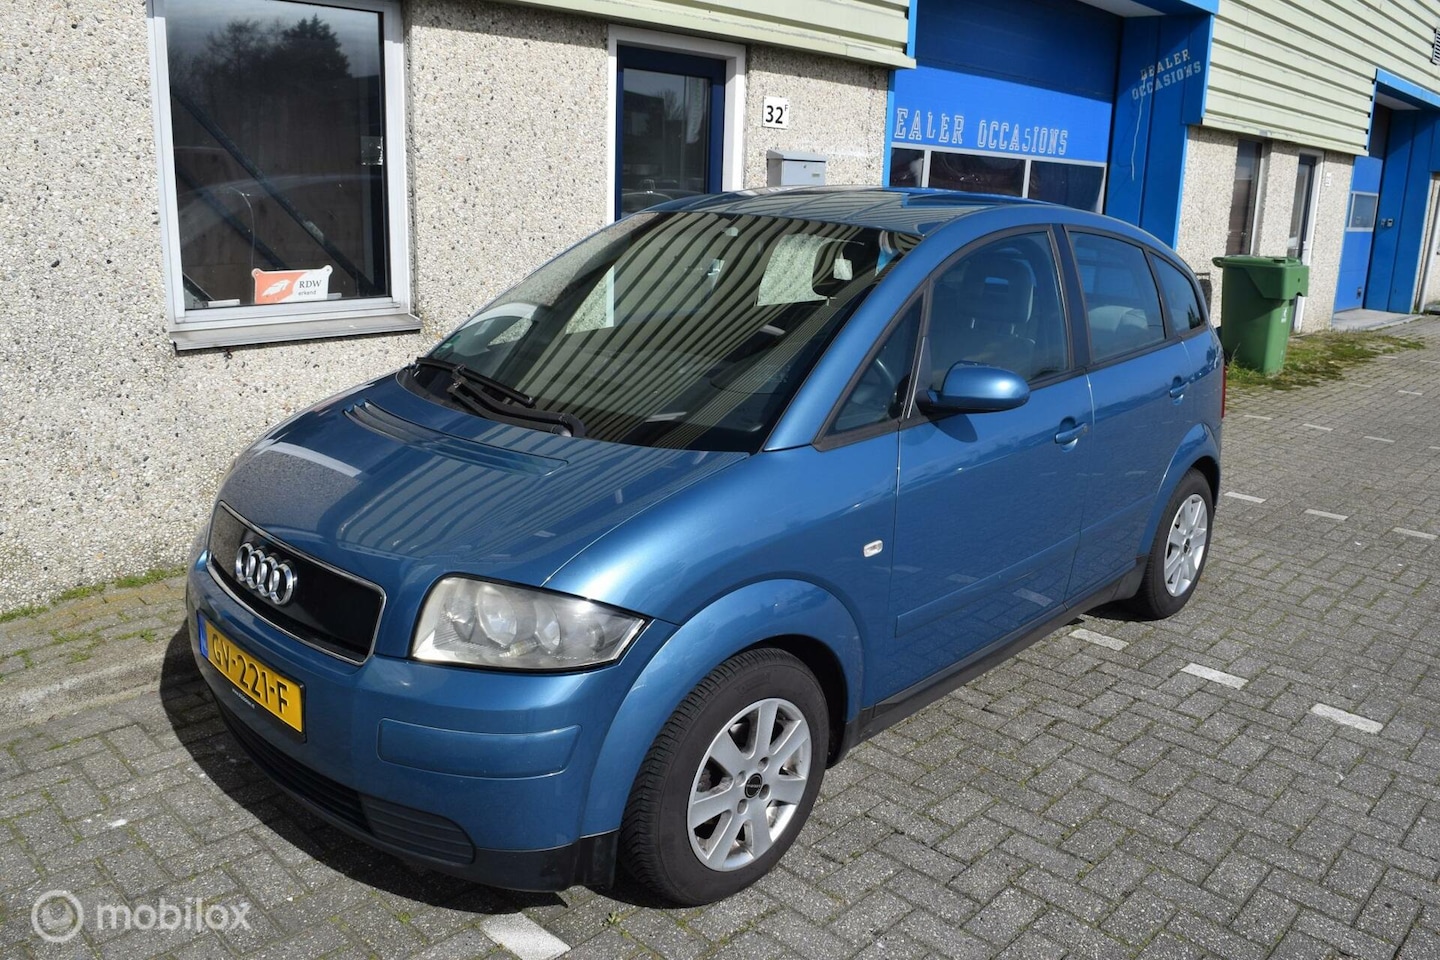 Ladder verlamming Metropolitan audi a2 automatic used – Search for your used car on the parking